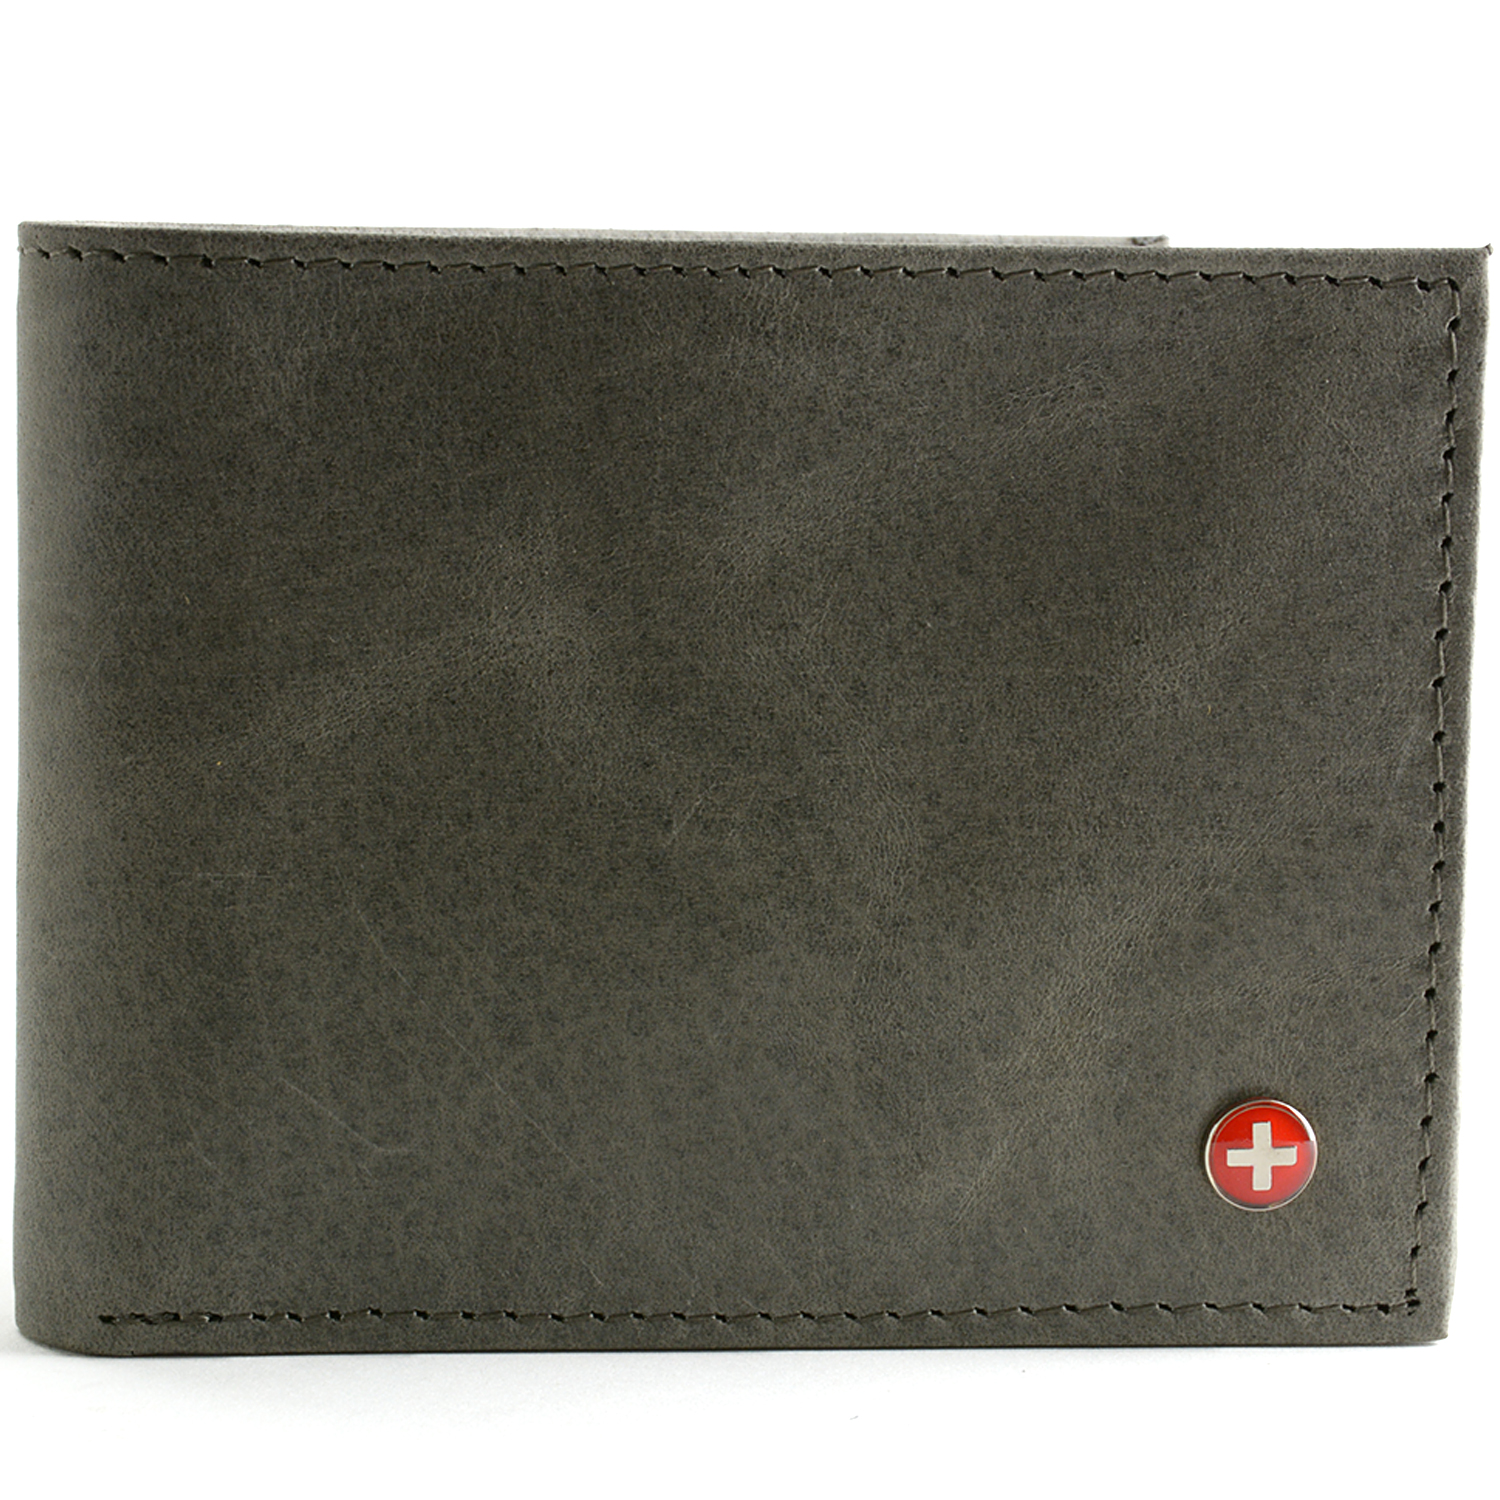 Alpine Swiss Mens Wallet Real Leather Bifold Trifold Hybrid Foldout ID Card Case - image 1 of 4